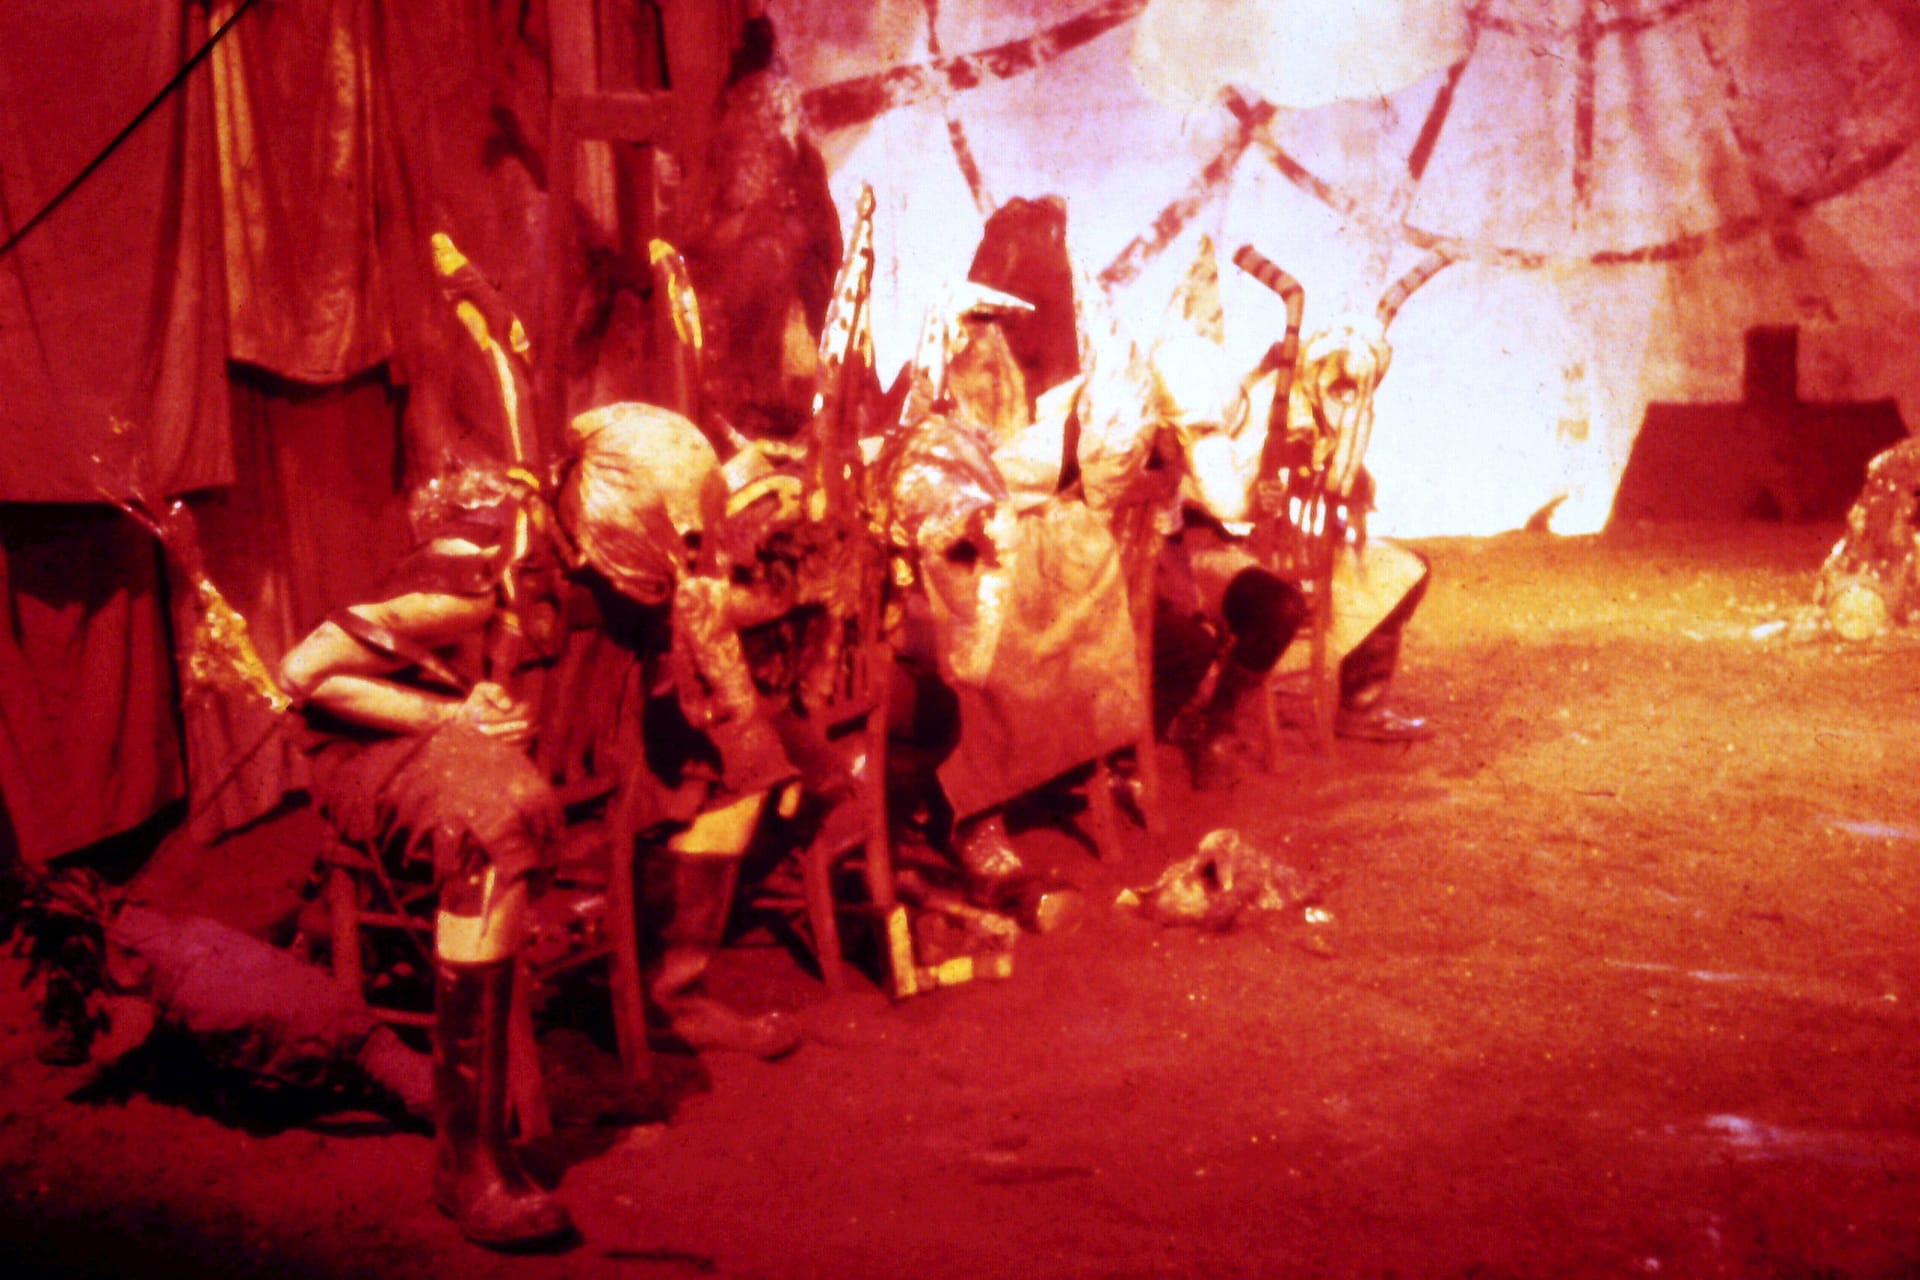 An orange light fills a room with figures sat on a chair, wearing costumes.